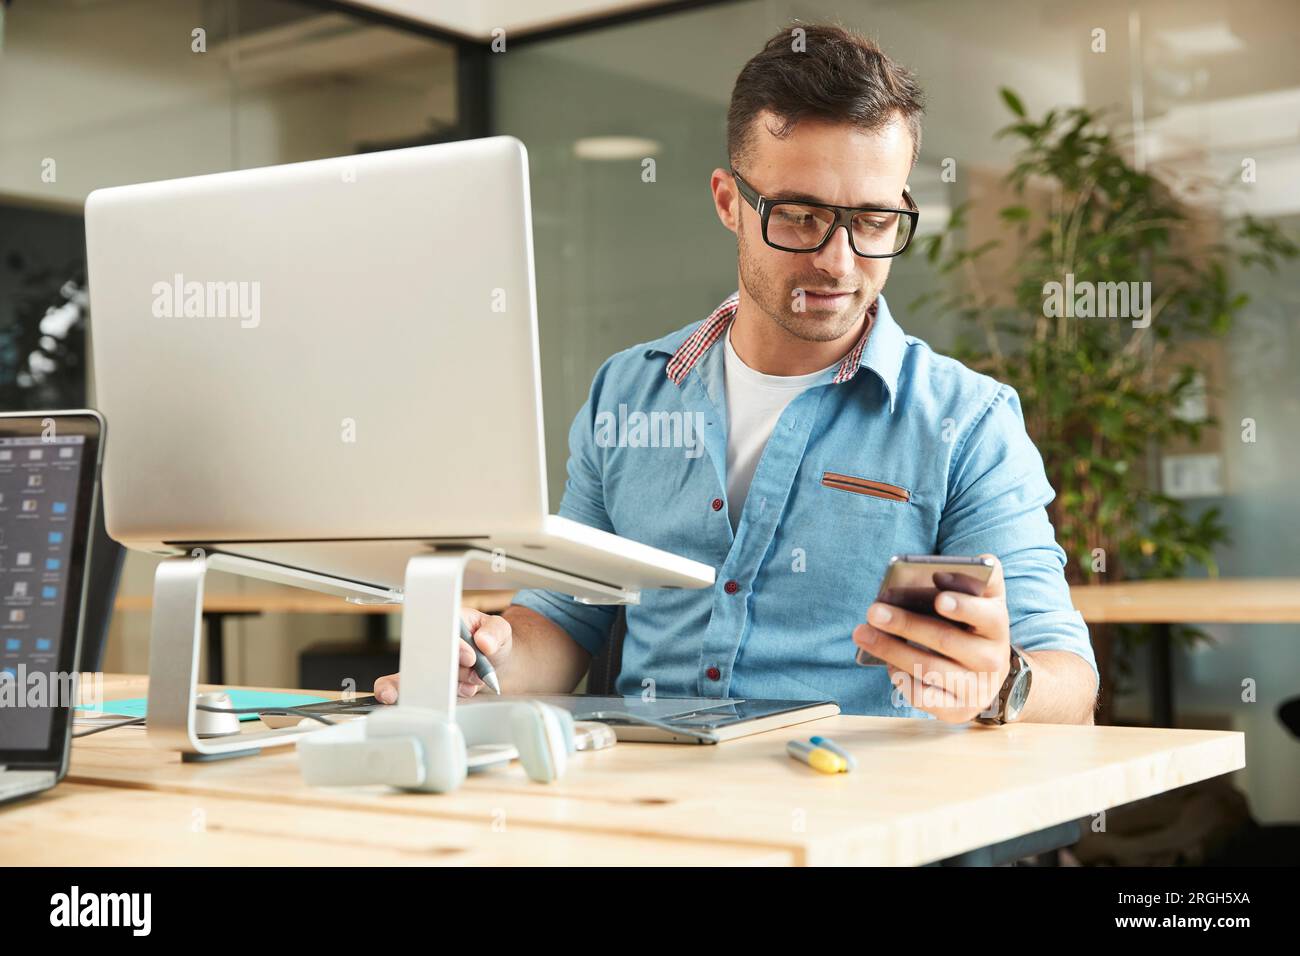 Young man holding smart phone by laptop Stock Photo